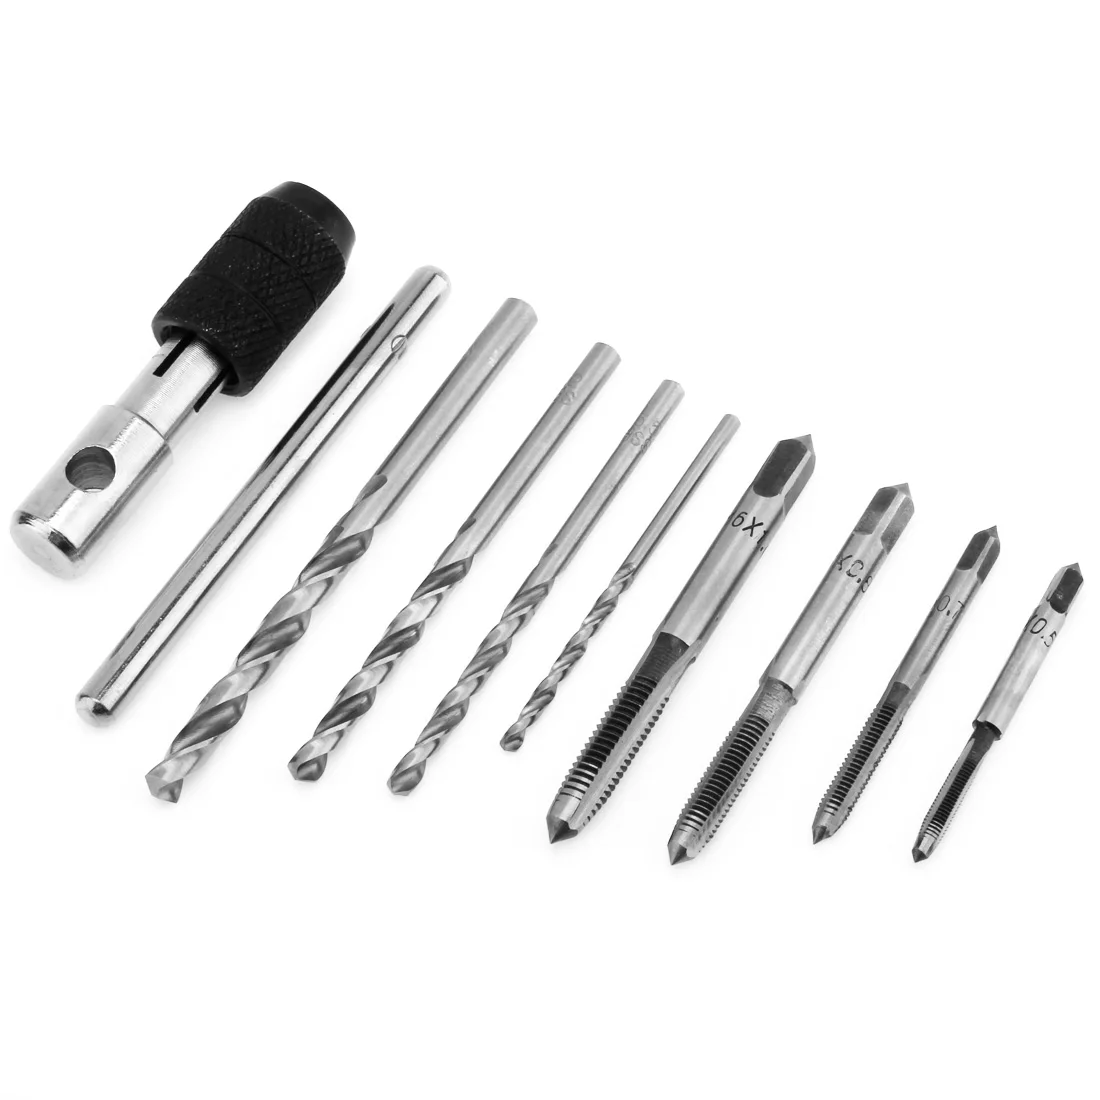 

9Pcs T Type Machine Hand Screw Thread Taps Reamer with 4pcs M3-M6 Tap Set and 4pcs 2.5-5.2 Twist Drill Bits and T Type Wrench